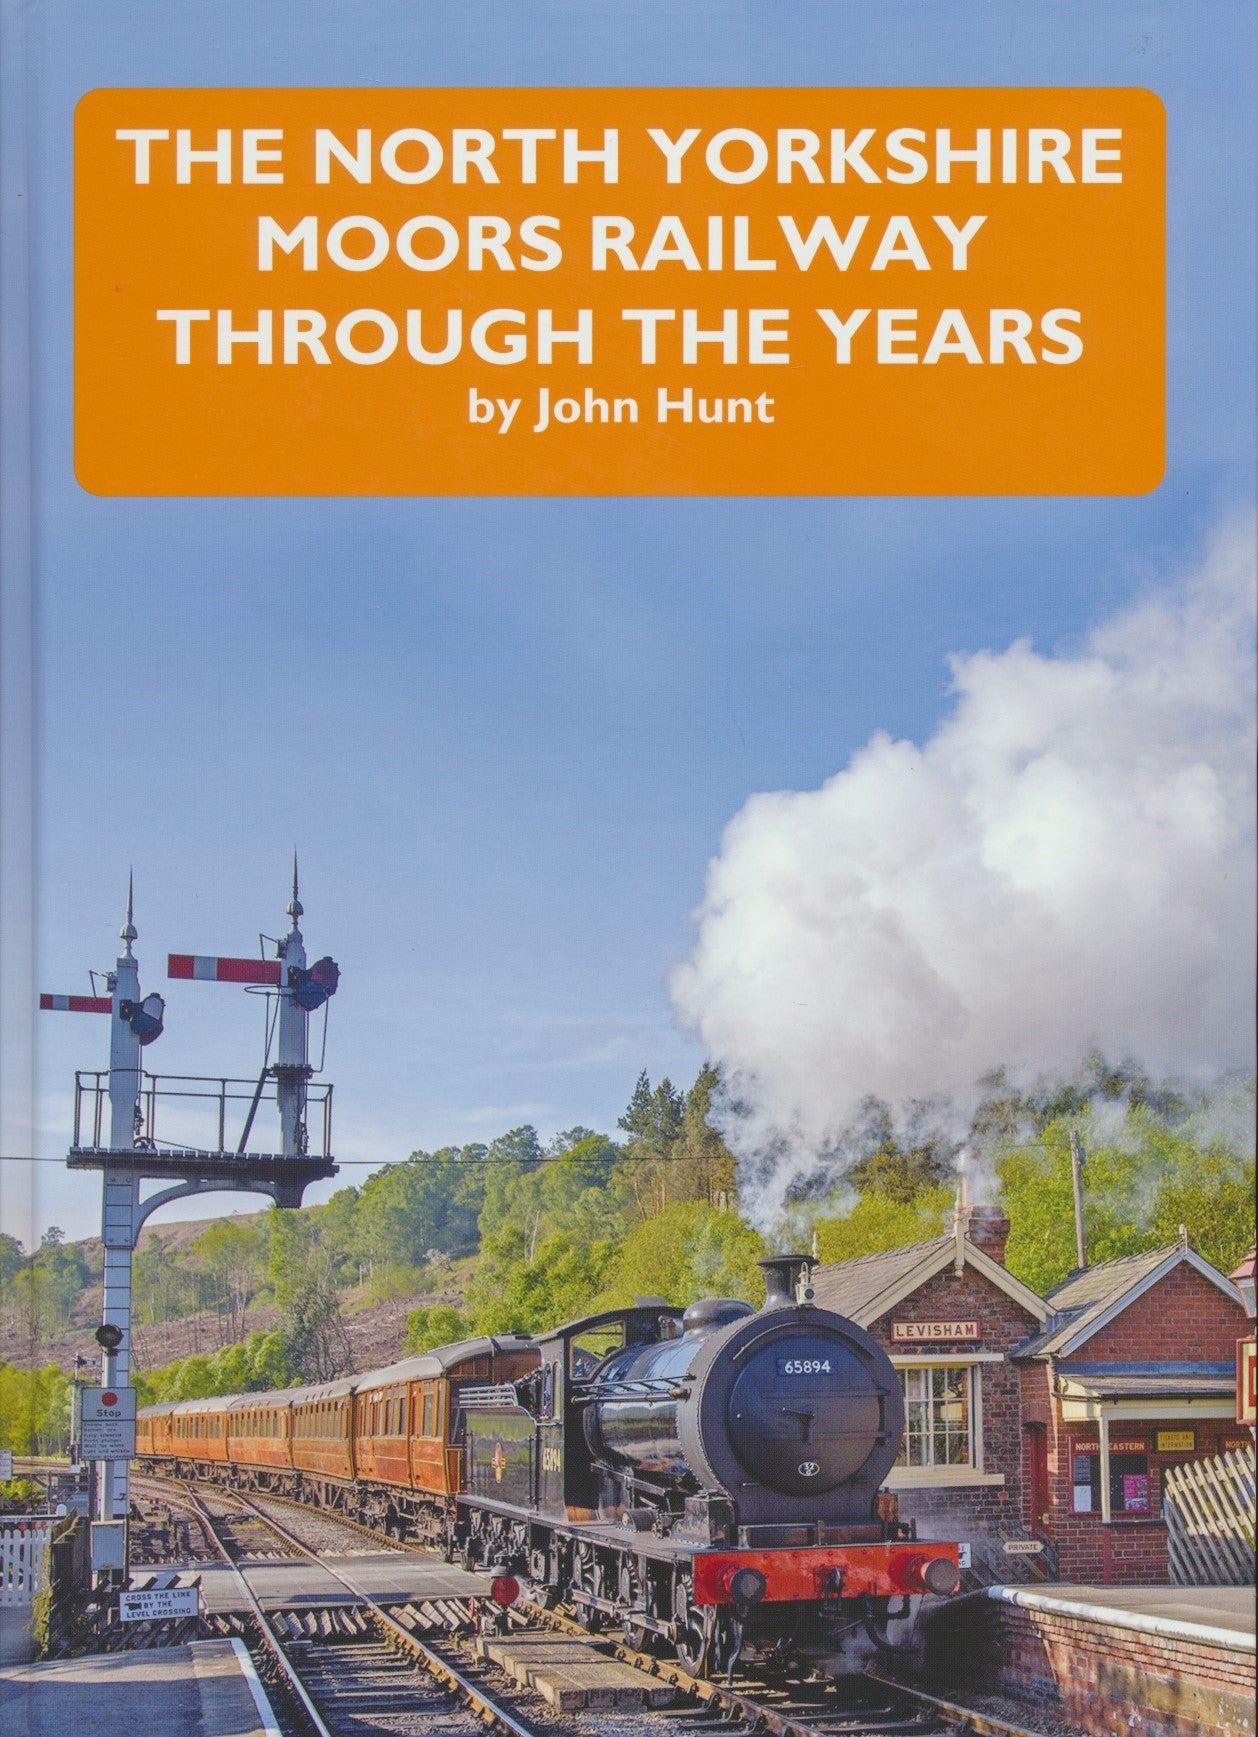 The North Yorkshire Moors Railway Through the Years